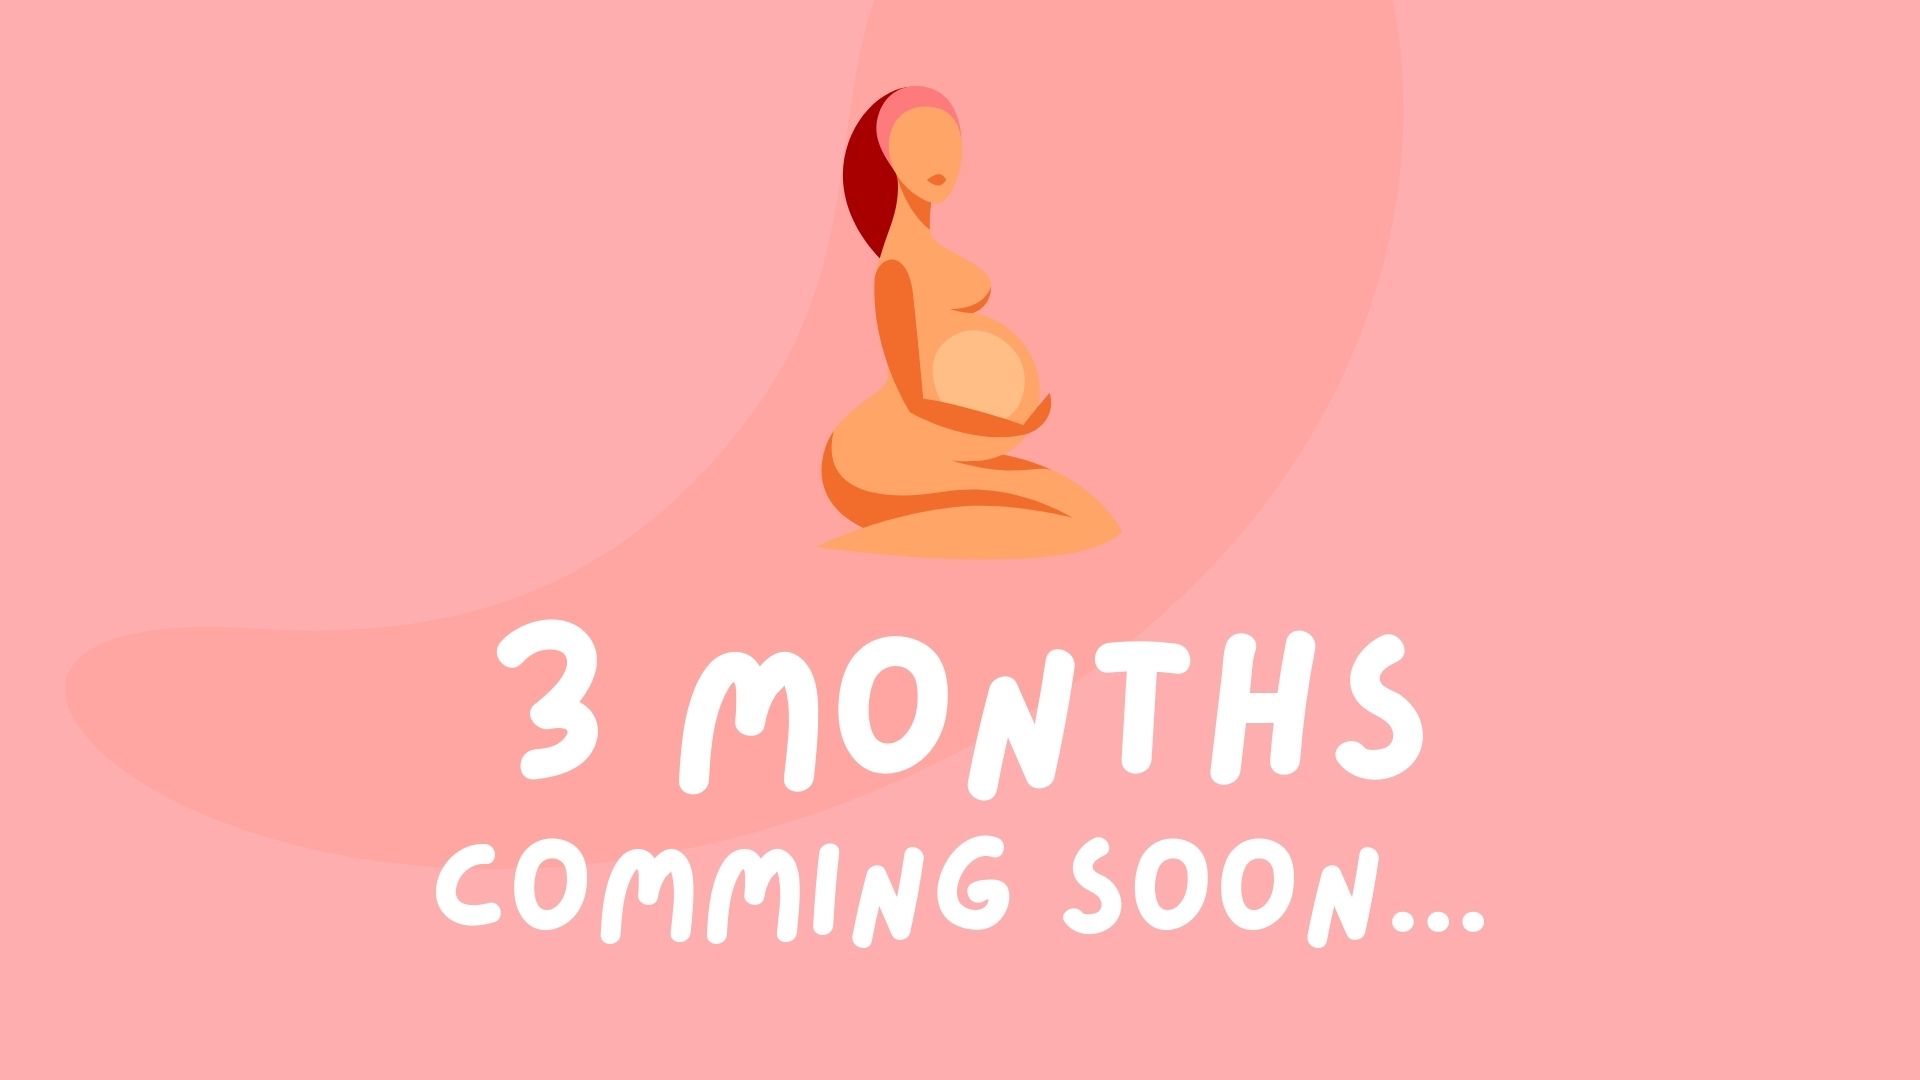 image of a 3 month old baby coming soon announcement